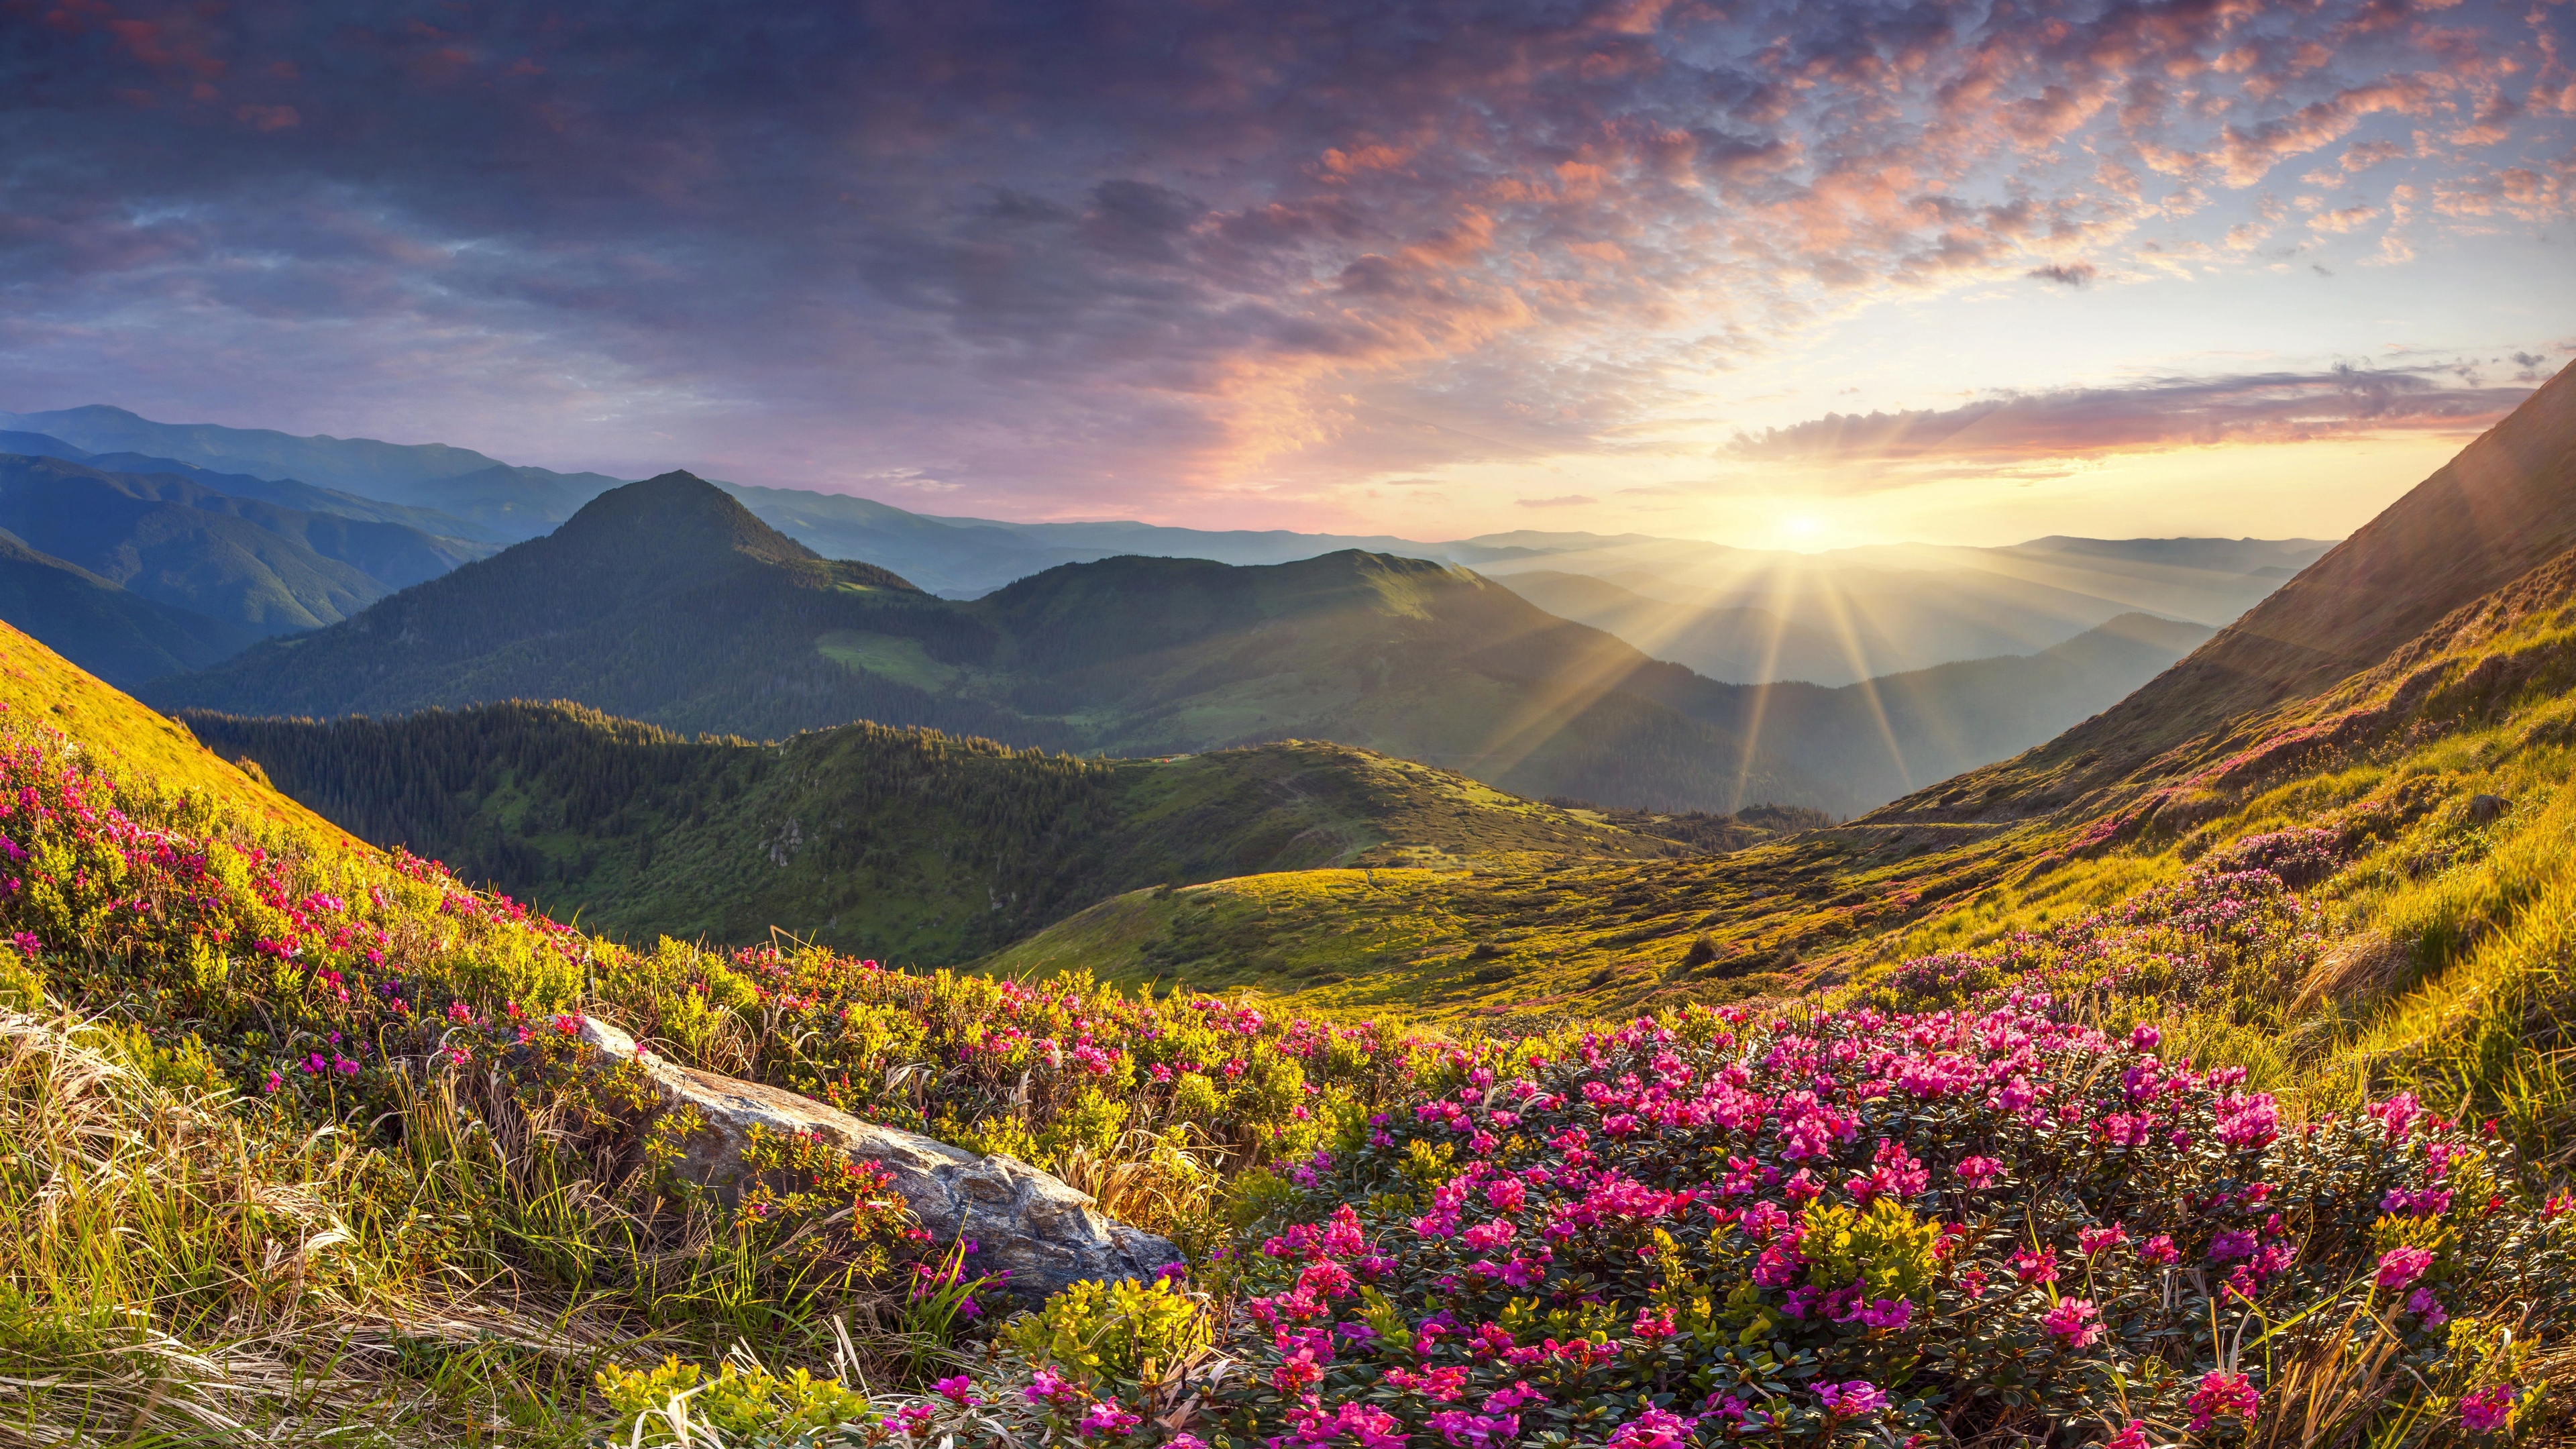 General 3840x2160 nature landscape mountains flowers Rhododendron stones sunrise sky clouds